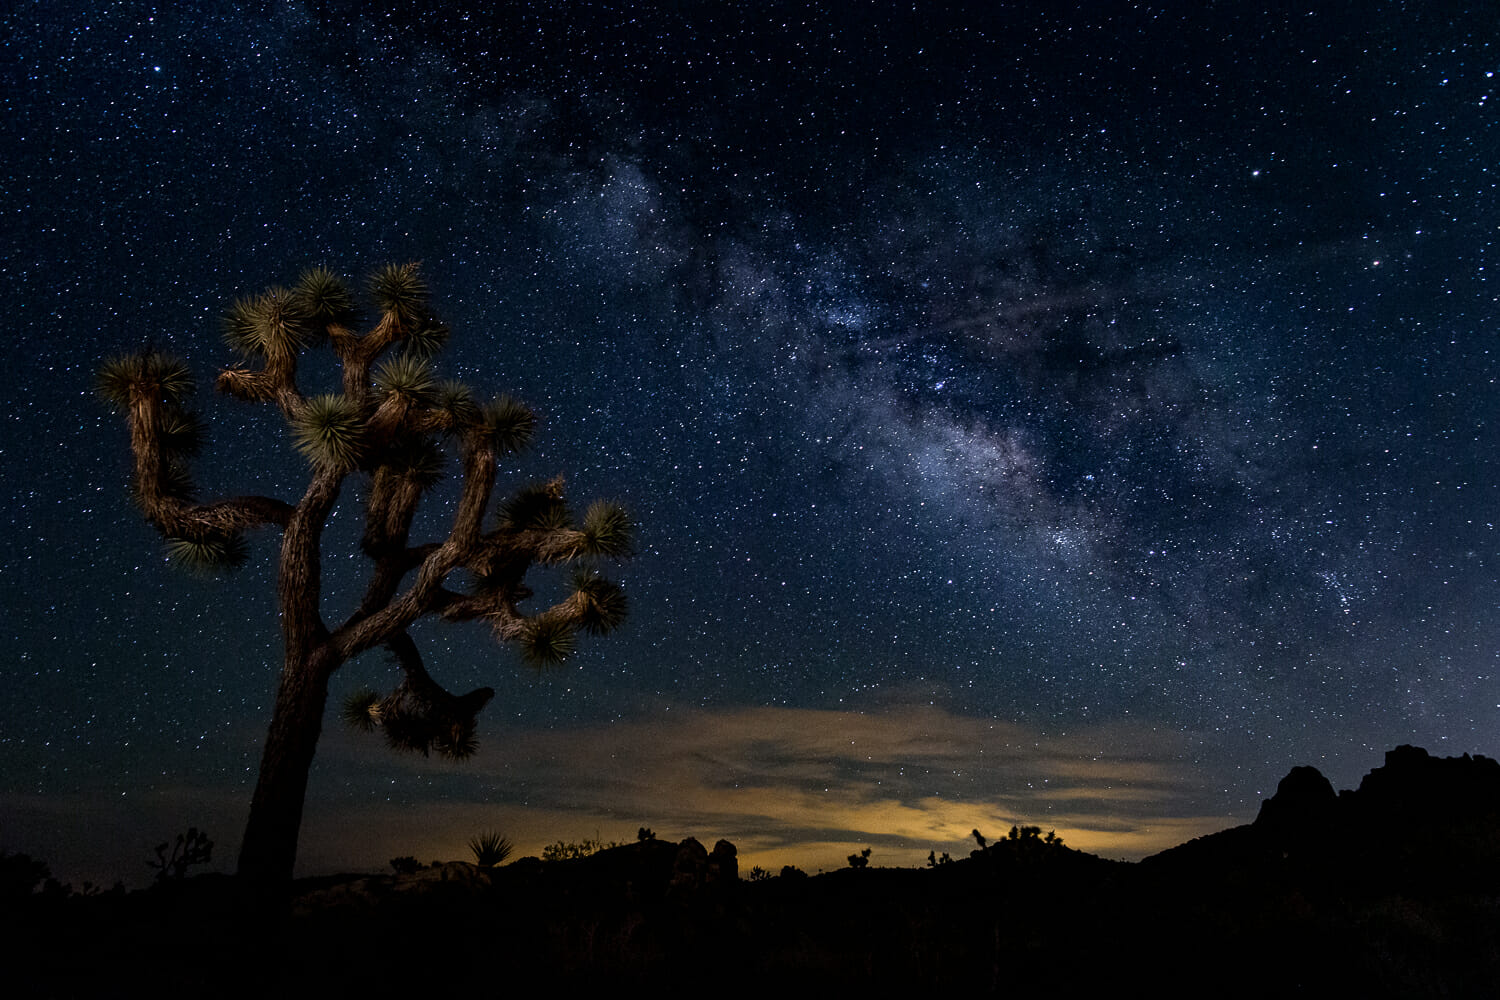 Joshua tree silhouette against a starry night sky with the milky way visible.